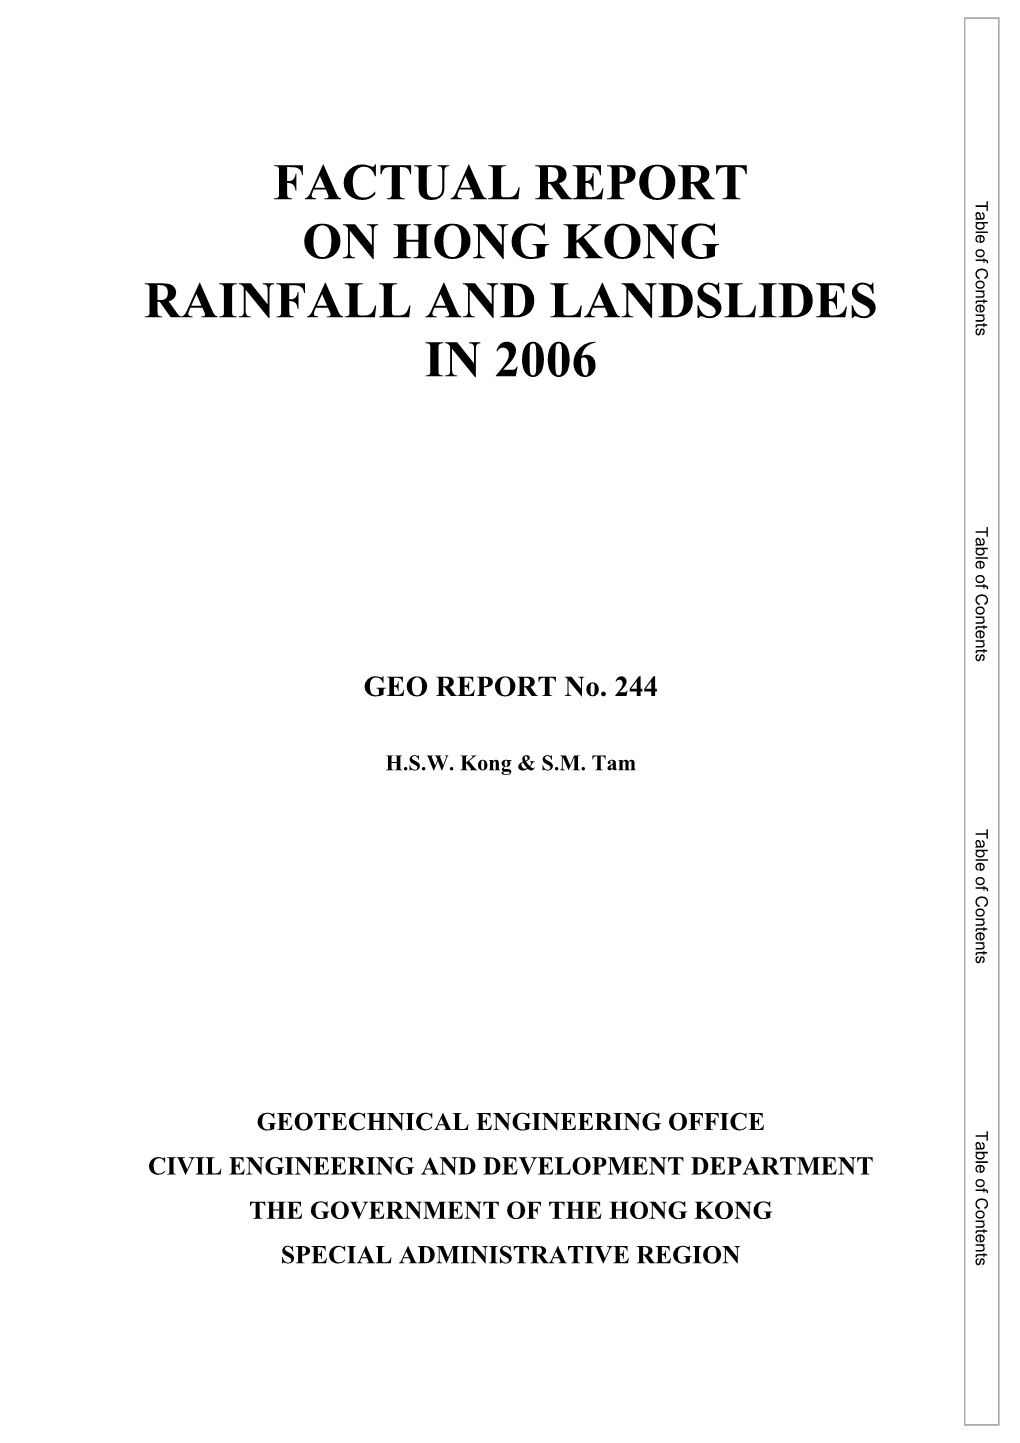 Factual Report on Hong Kong Rainfall and Landslides in 2006